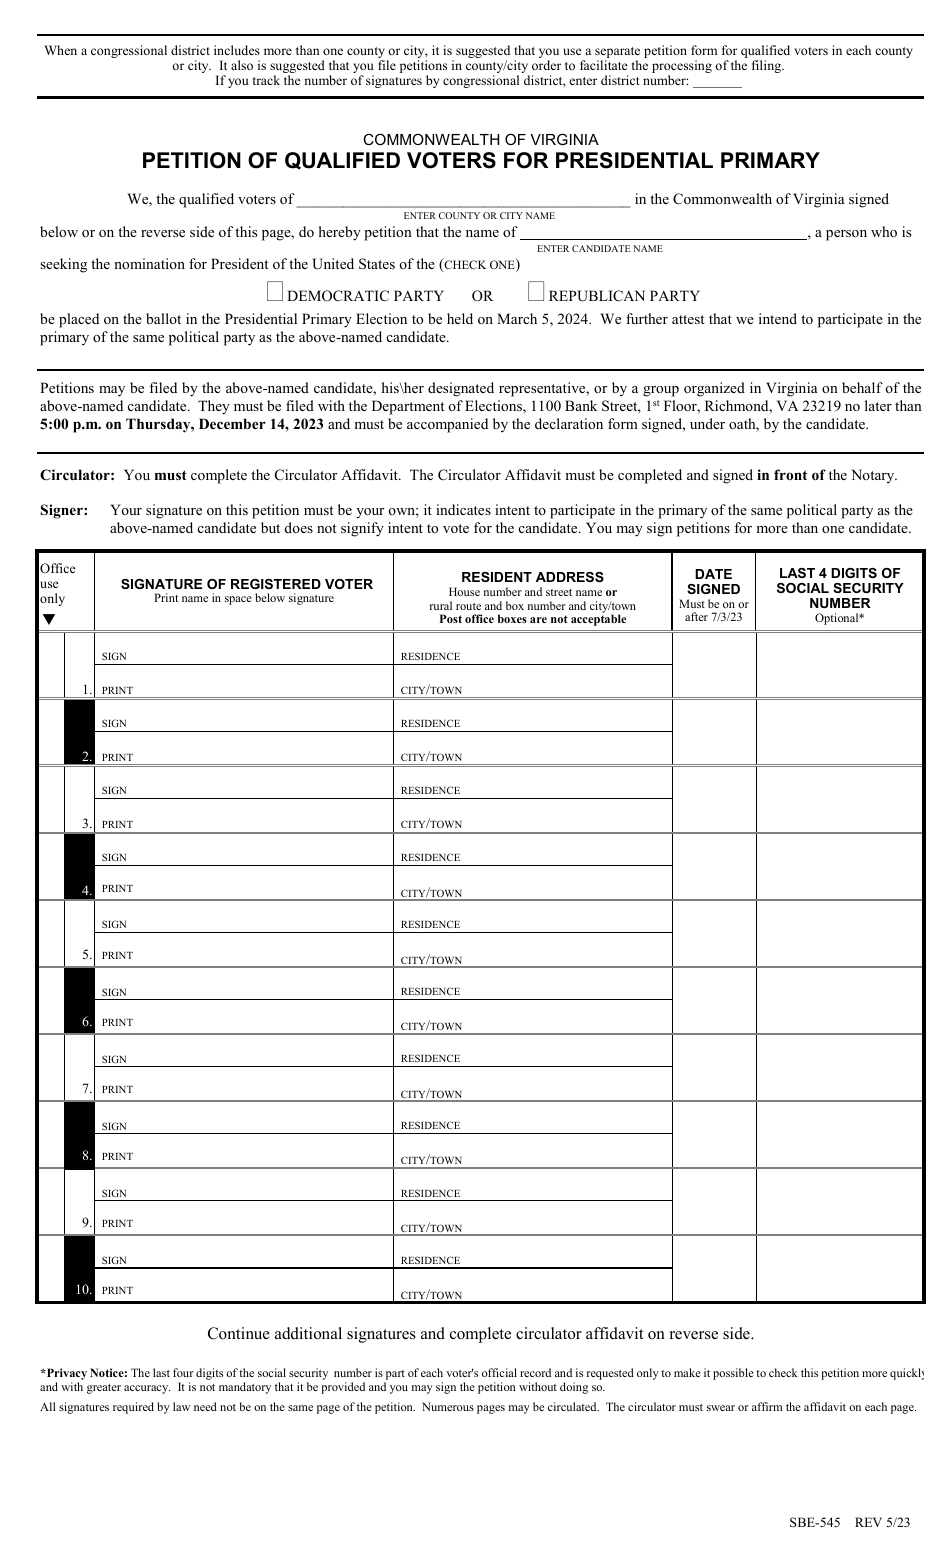 Form SBE-545 Petition of Qualified Voters for Presidential Primary - Virginia, Page 1